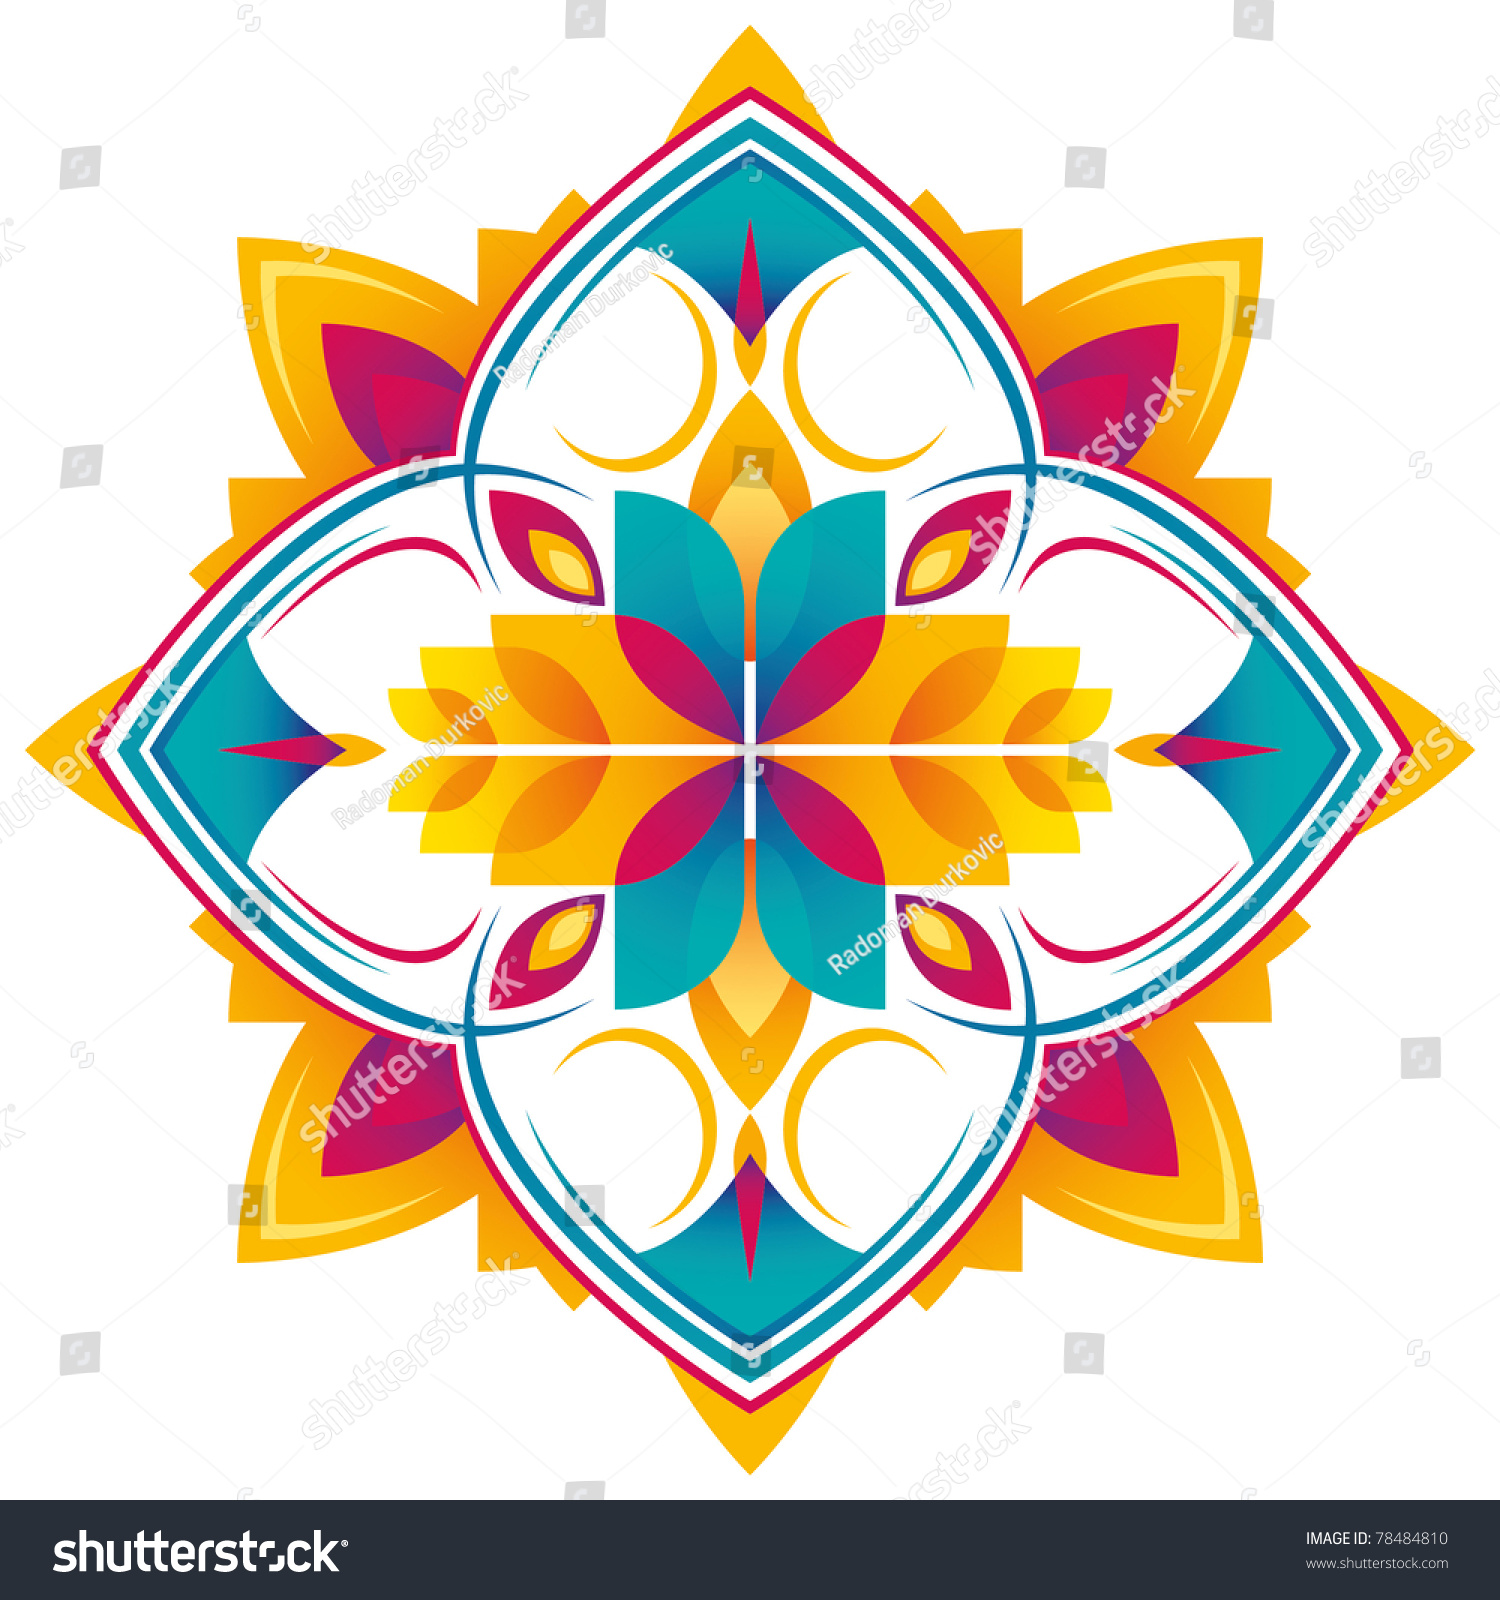 Modern Arabesque With Colorful Shapes. Vector Illustration. - 78484810 ...